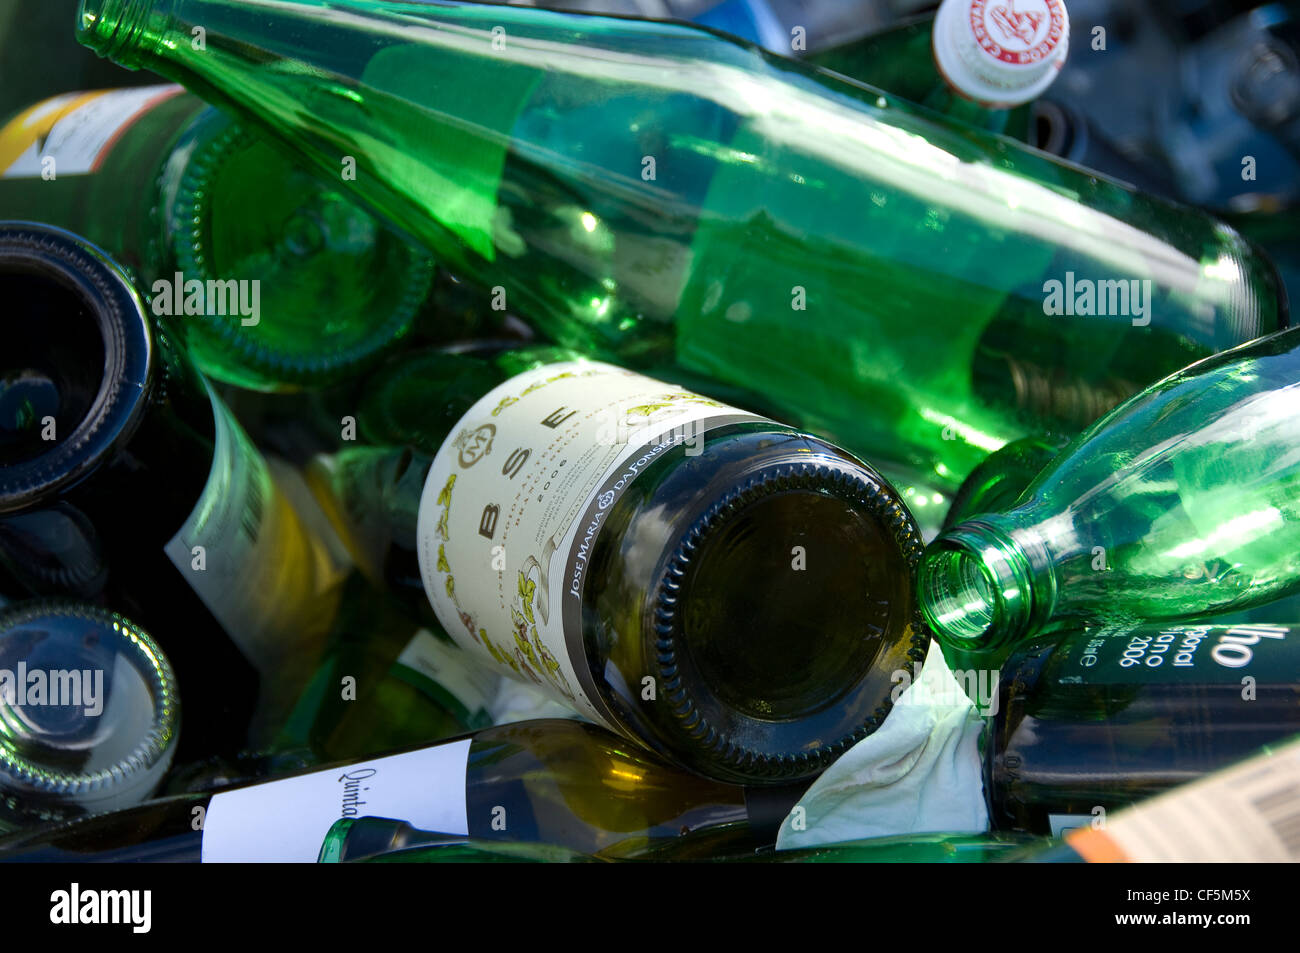 Discarded bottles in a waste recycling bin. Stock Photo